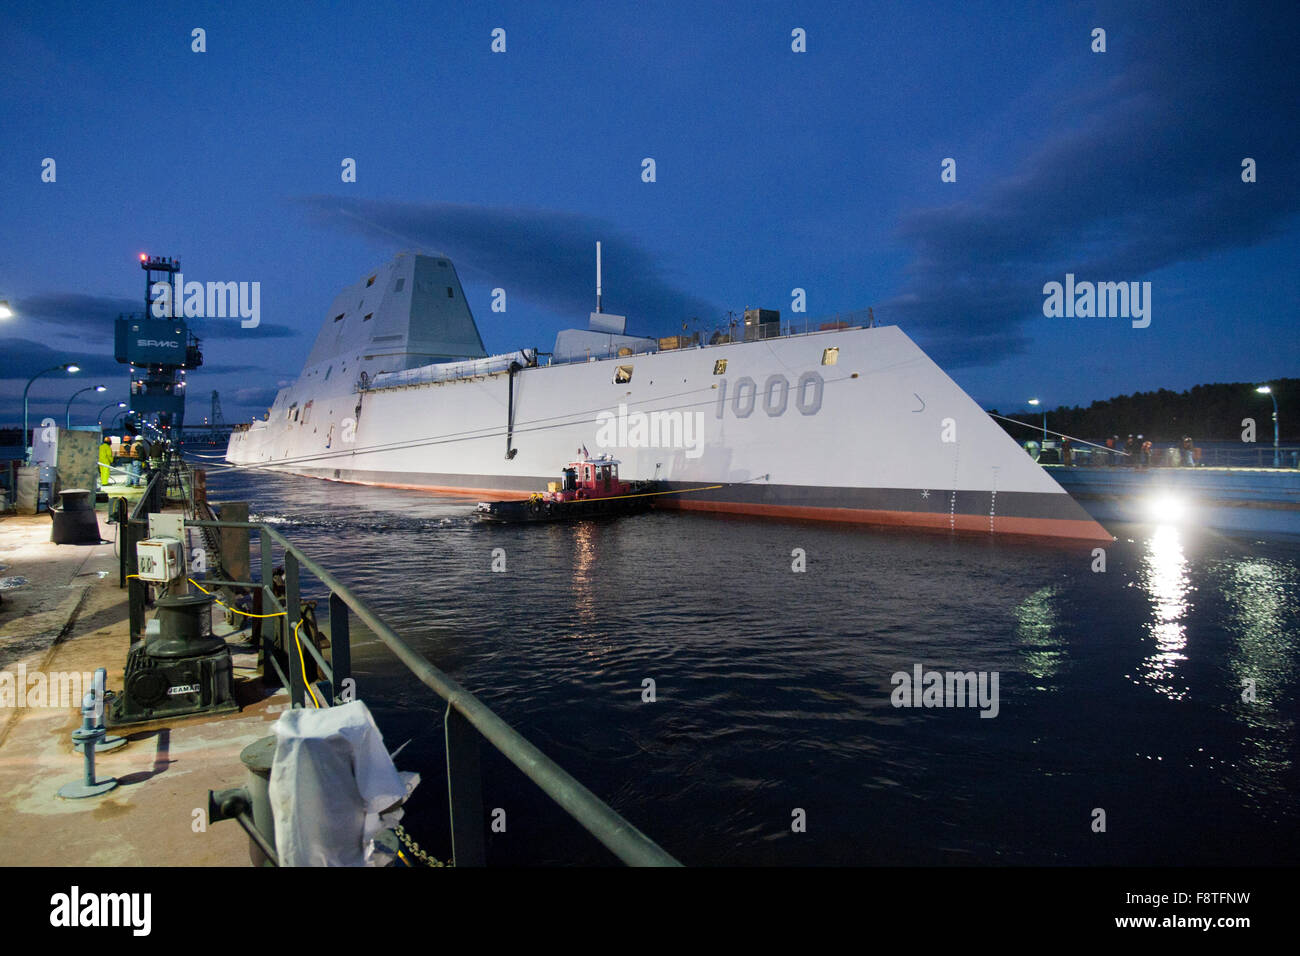 The Zumwalt-class guided-missile destroyer USS Zumwalt is floated out of dry dock at the General Dynamics Bath Iron Works shipyard October 28, 2013 in Bath, Maine. The ship, the first of three Zumwalt-class destroyers is the latest generation of naval technology. Stock Photo